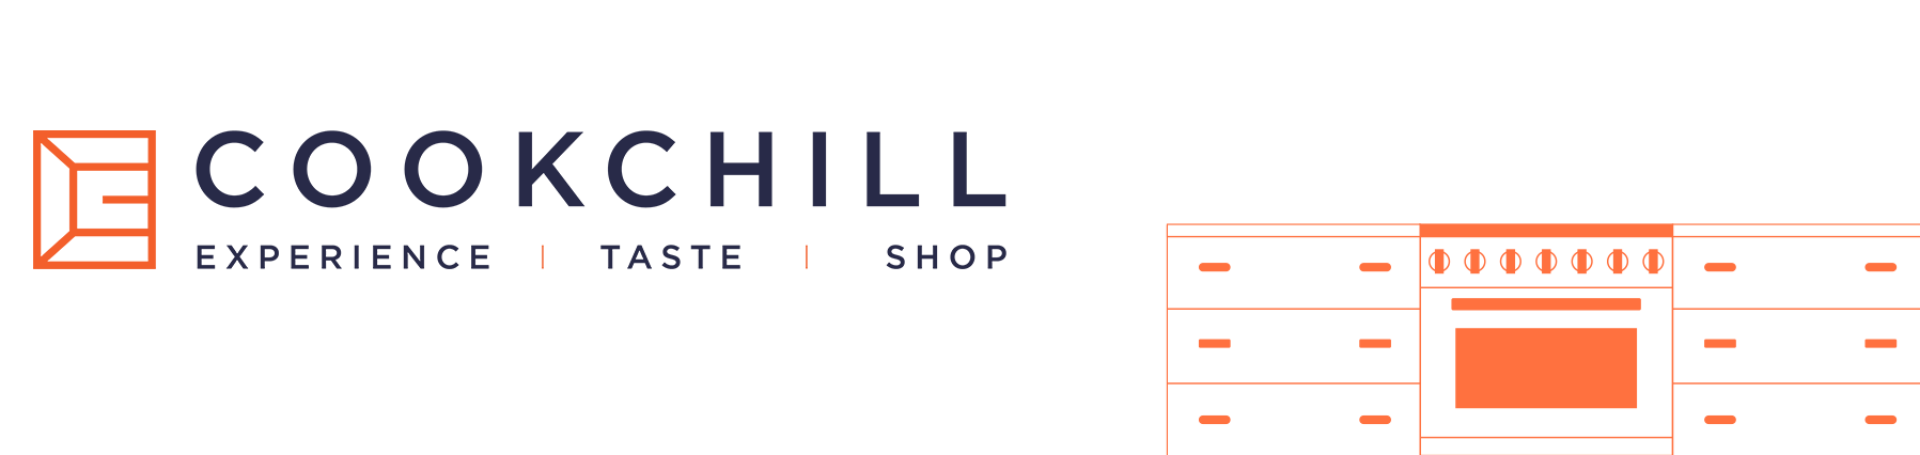 Logo of "cookchill" featuring the tagline "experience | taste | shop | contact us" with stylized kitchen elements such as a calendar and oven.